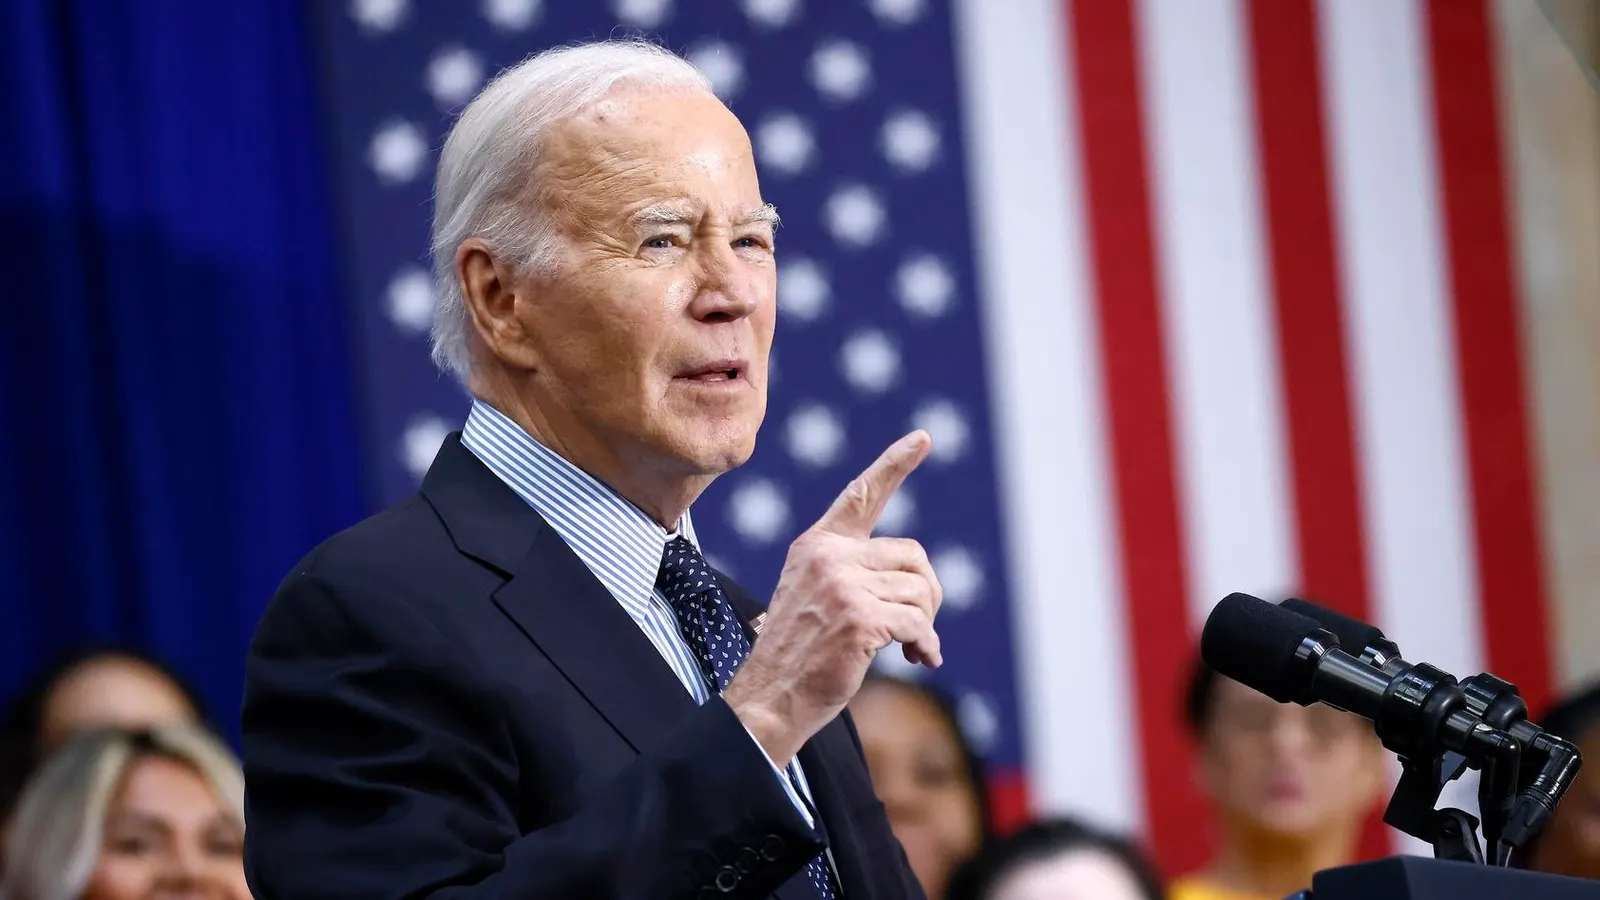 New Clash Over Student Loans: States Sue Over Biden’s Easy Forgiveness Plan